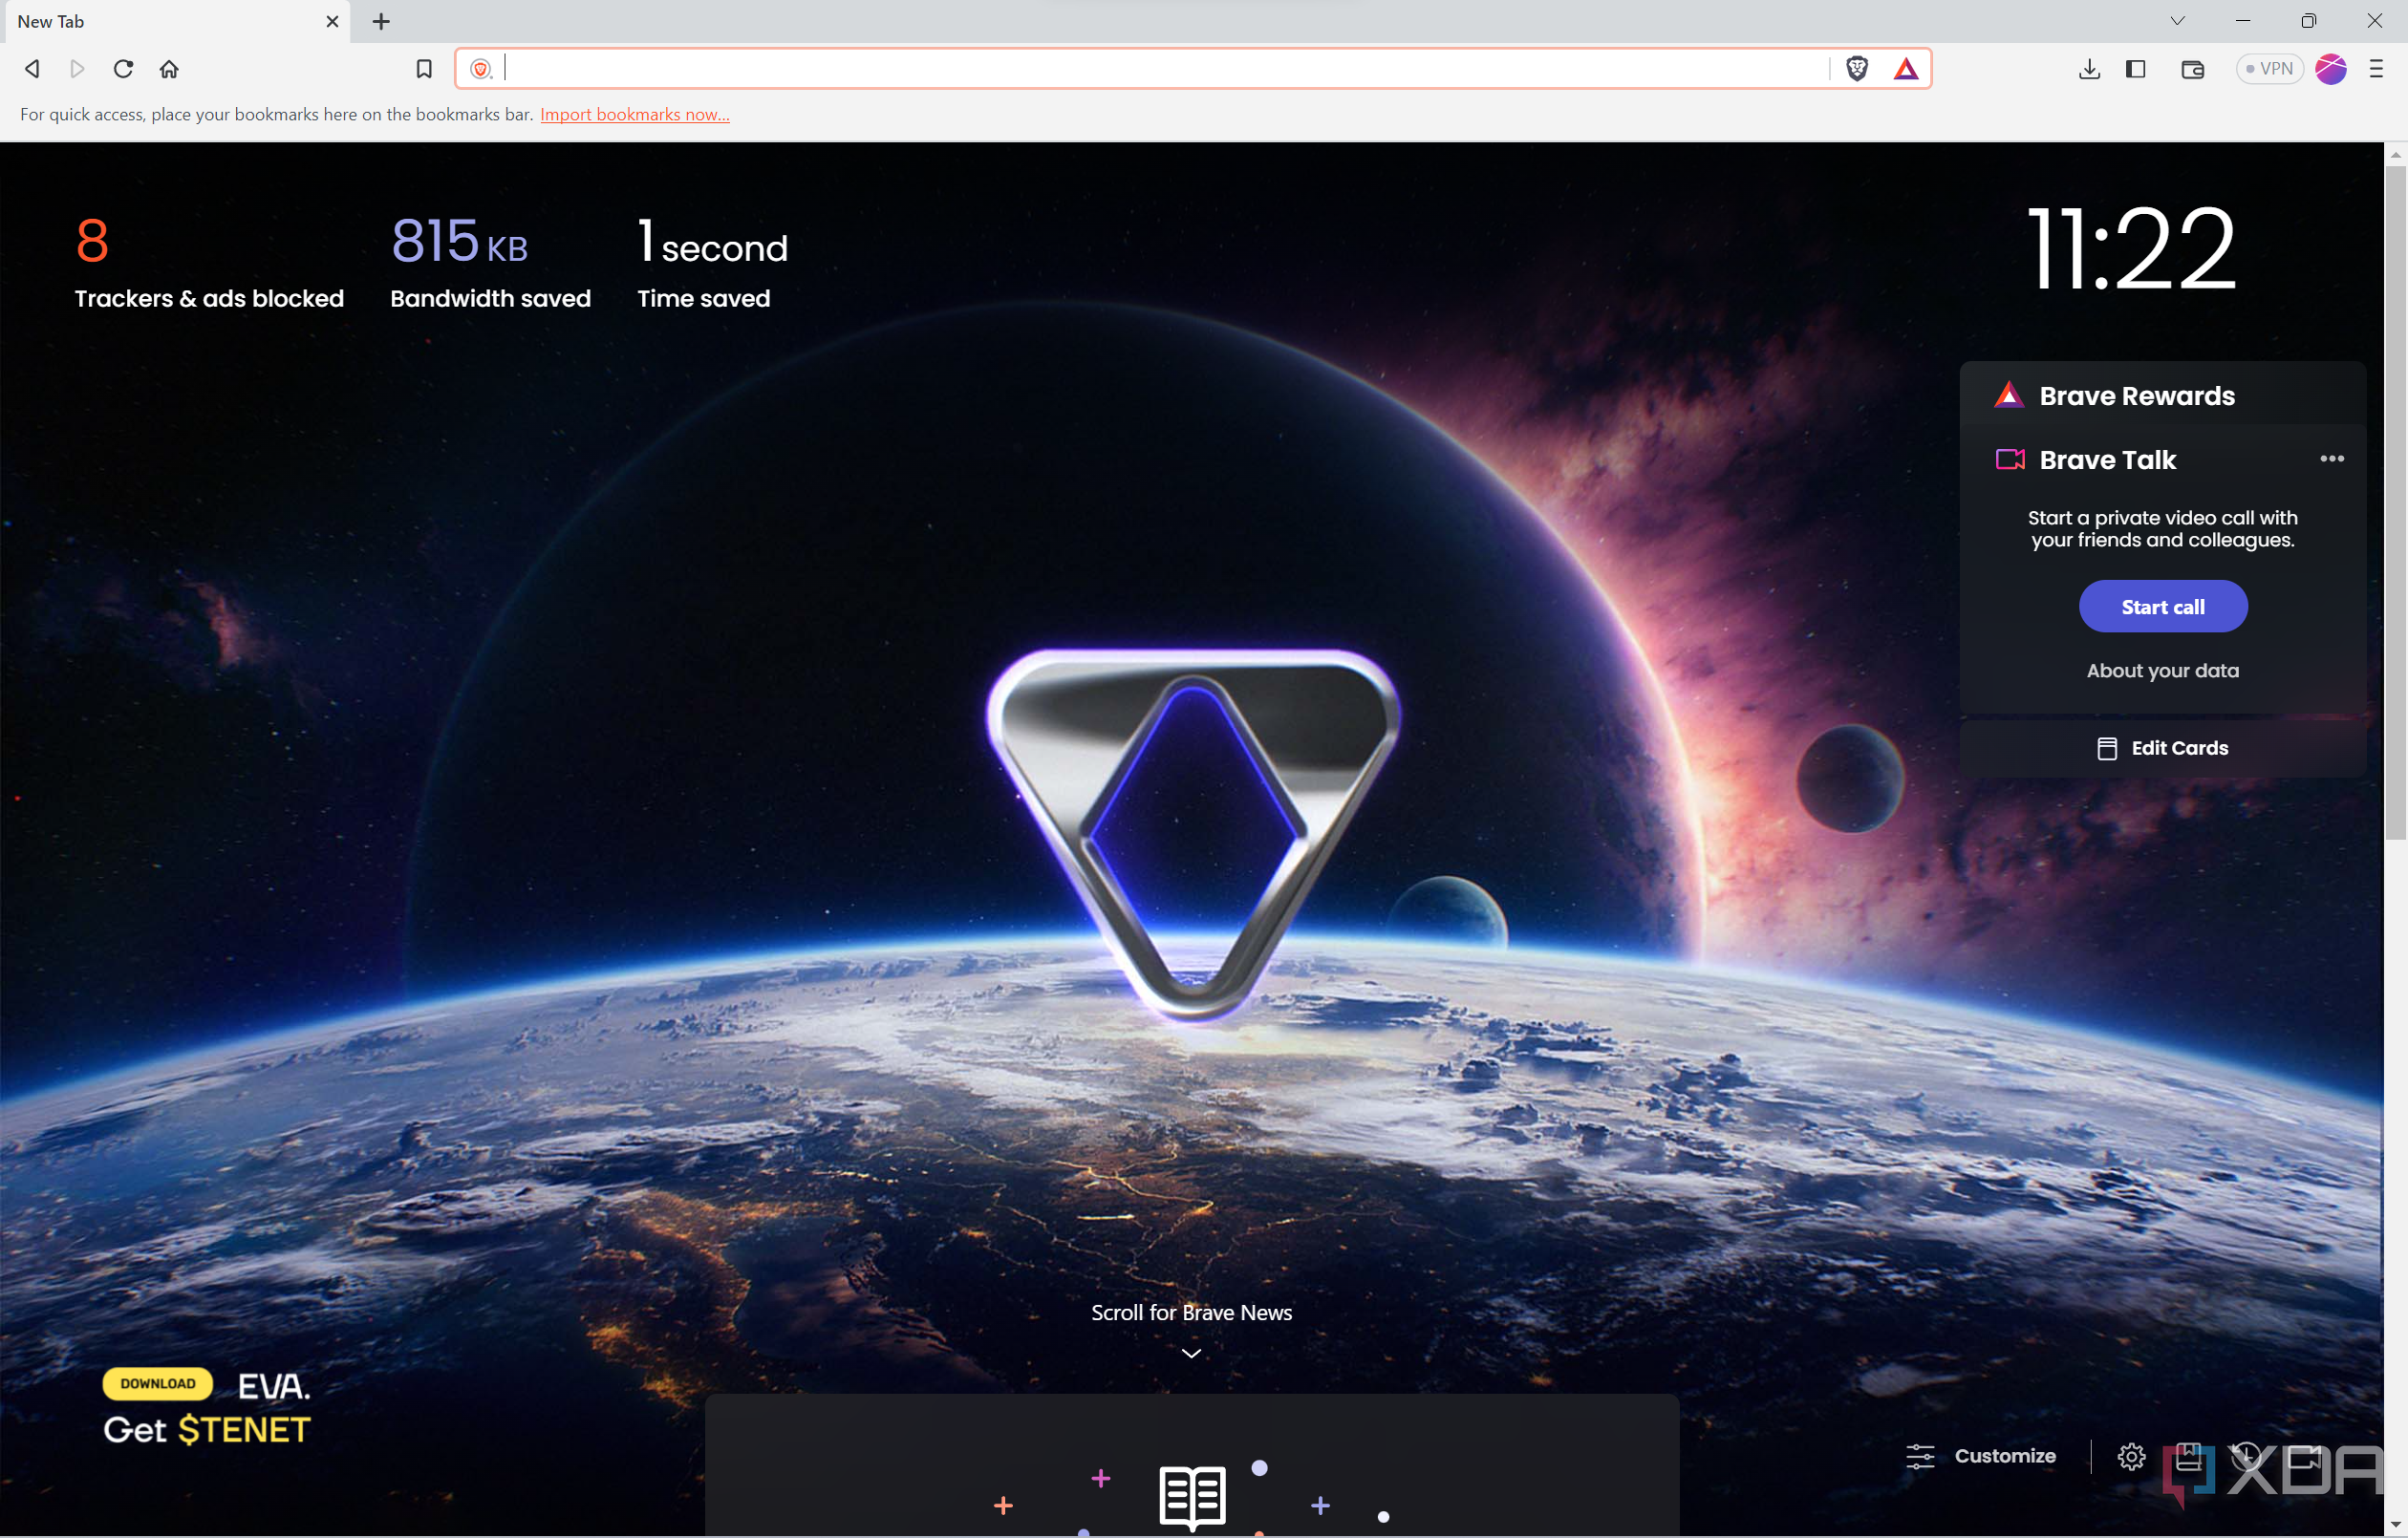 Screenshot of the Brave browser homepage